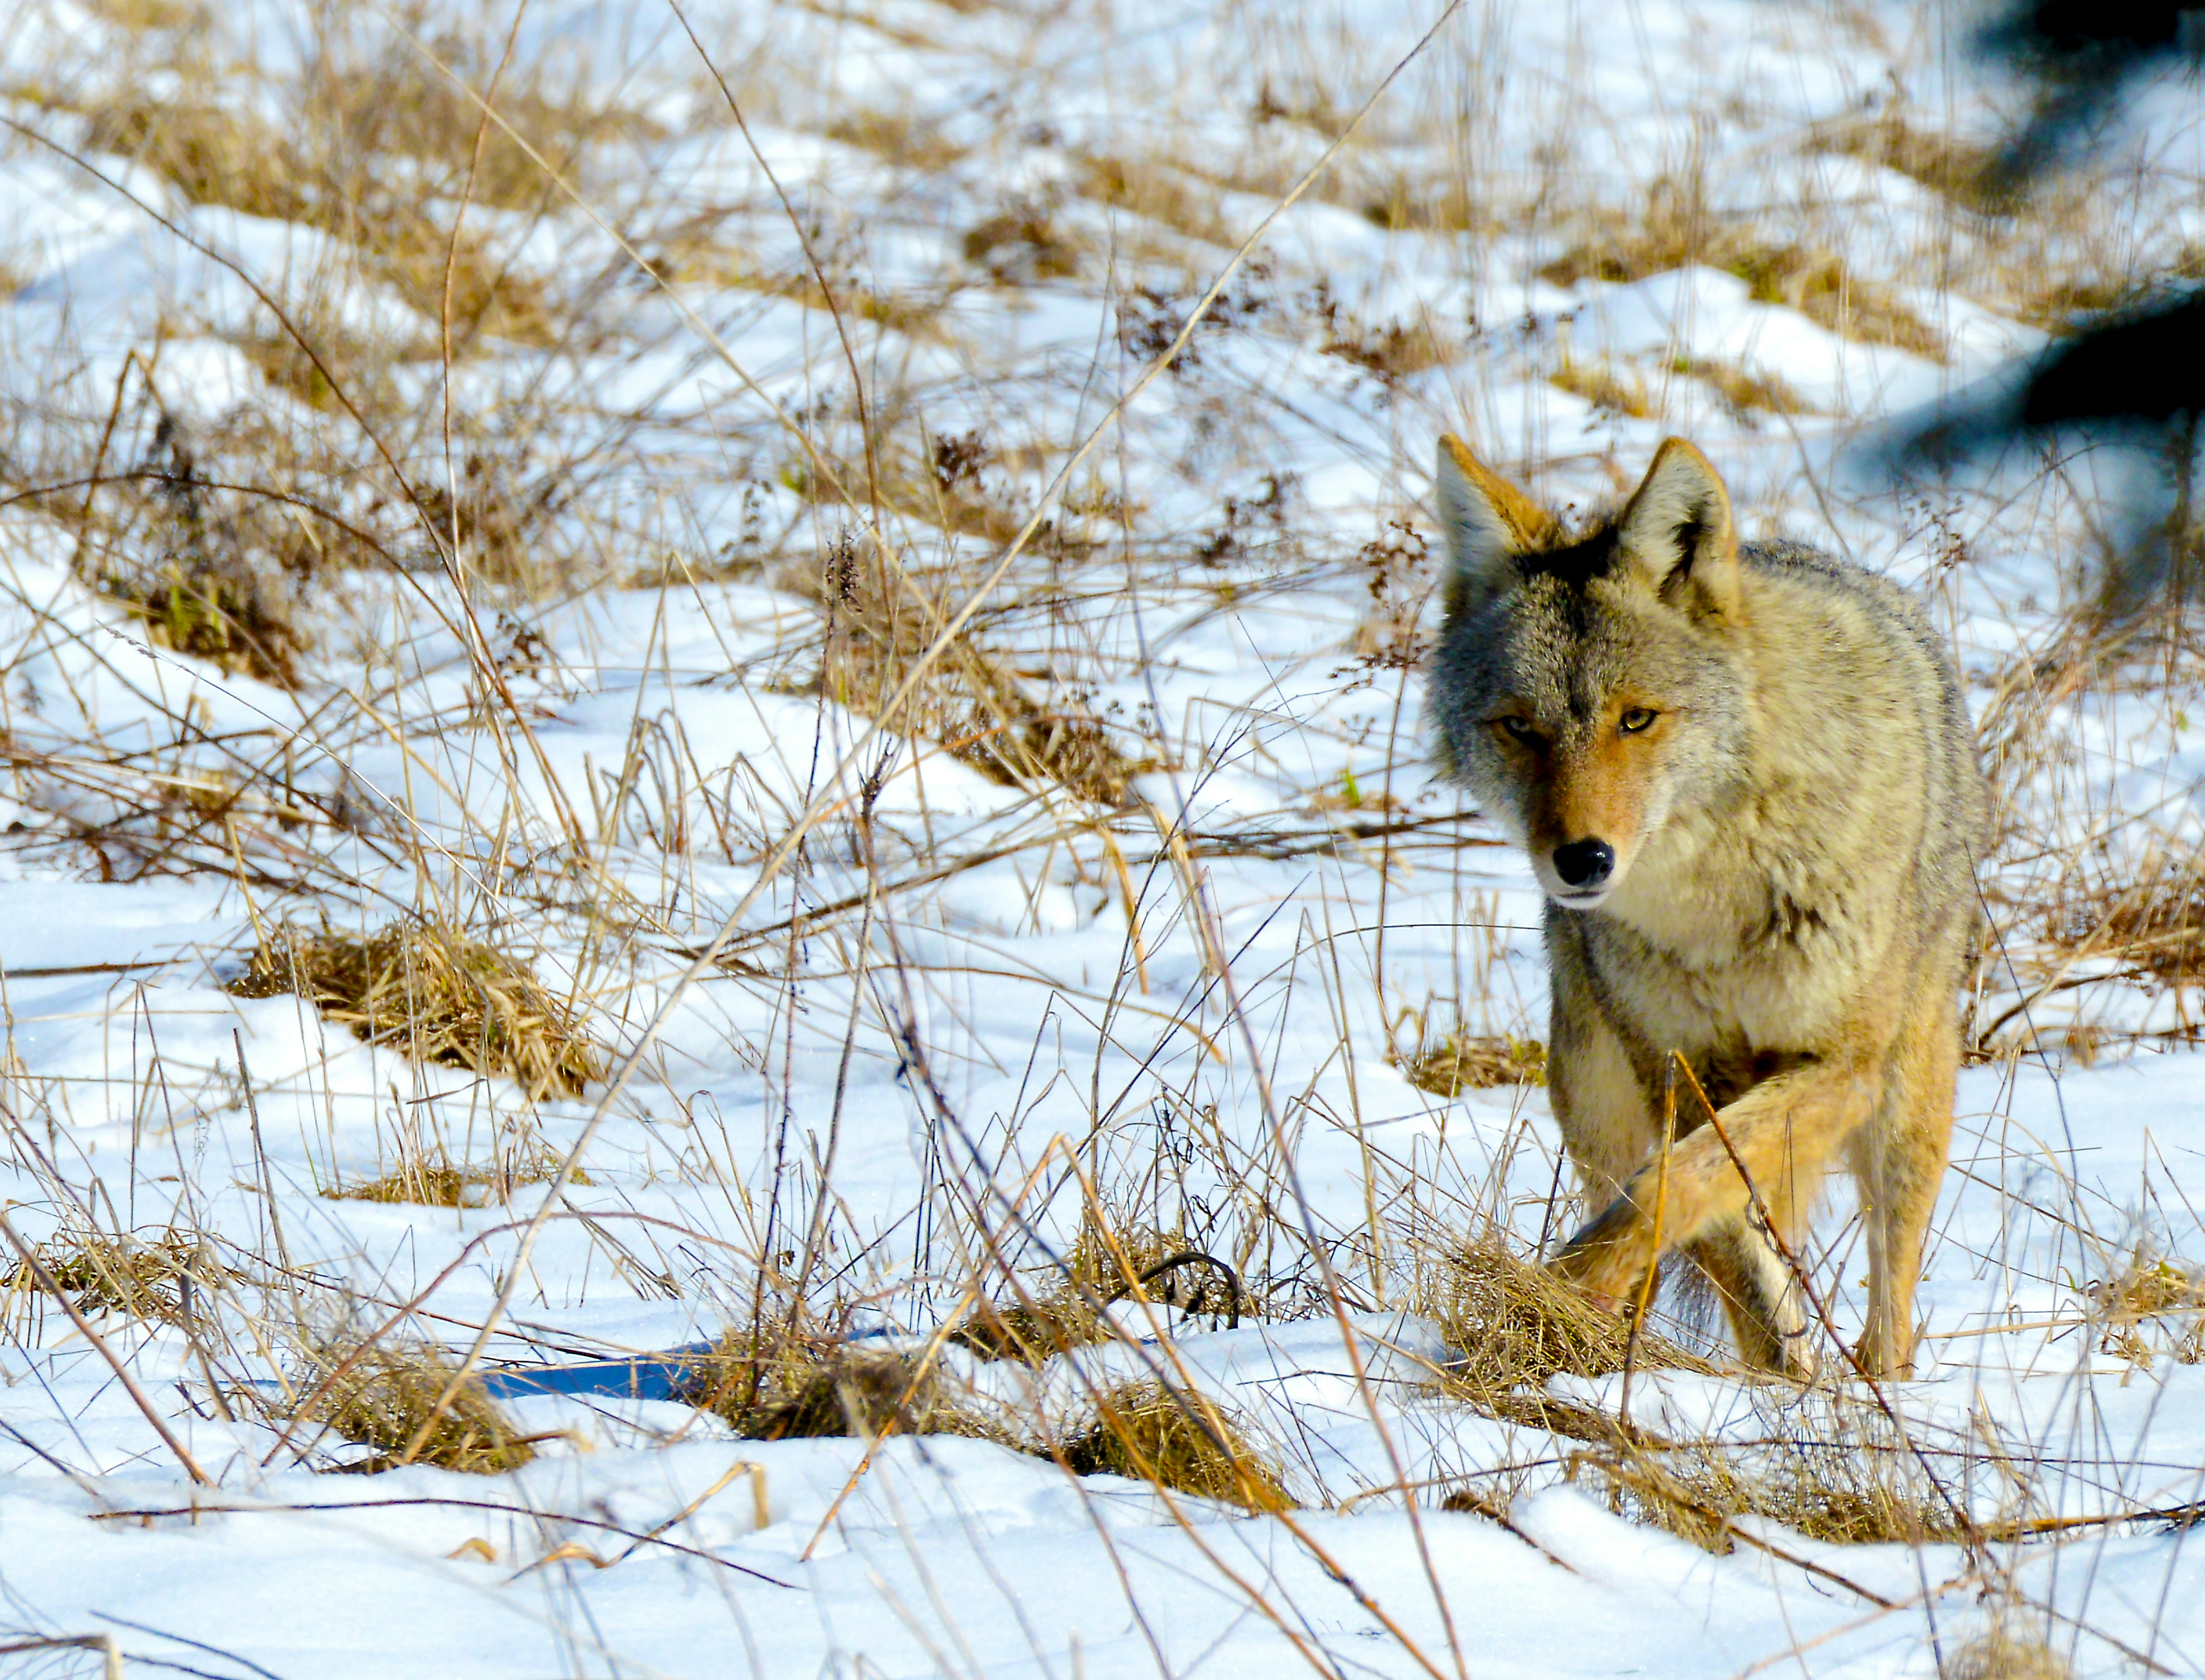 coyote walking in snow field with withered grass